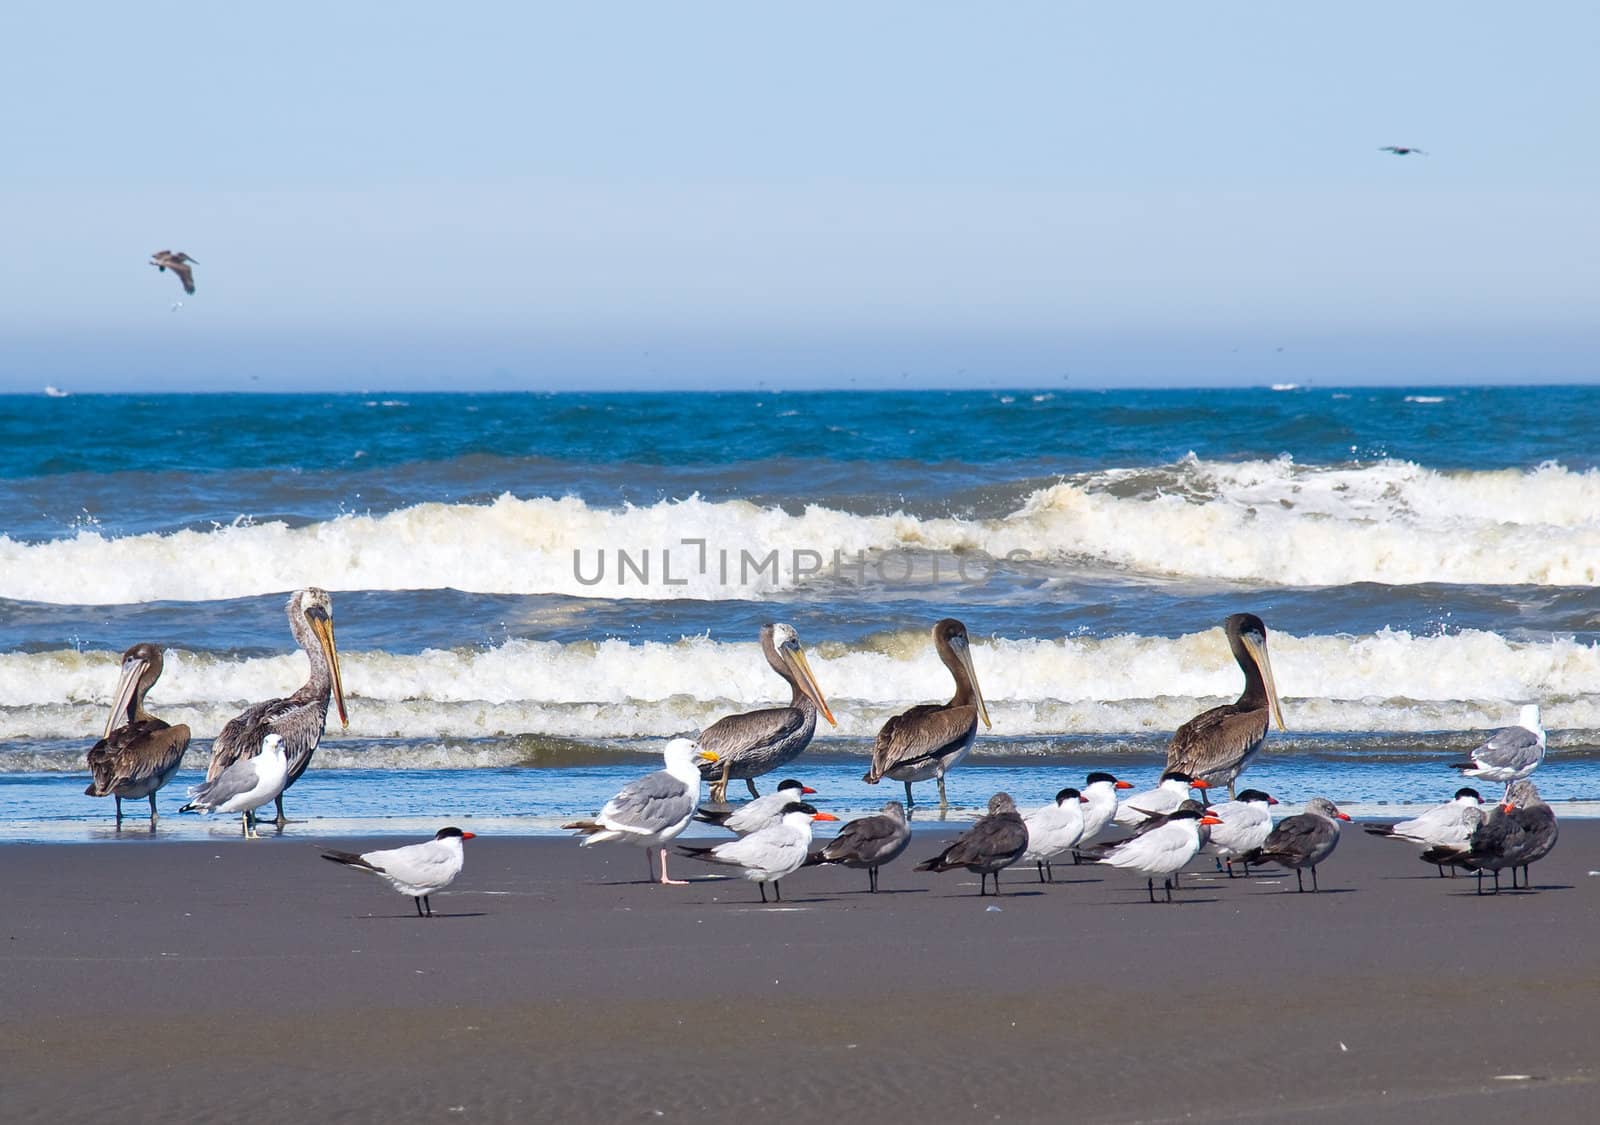 A Variety of Seabirds at the Seashore Featuring Pelicans